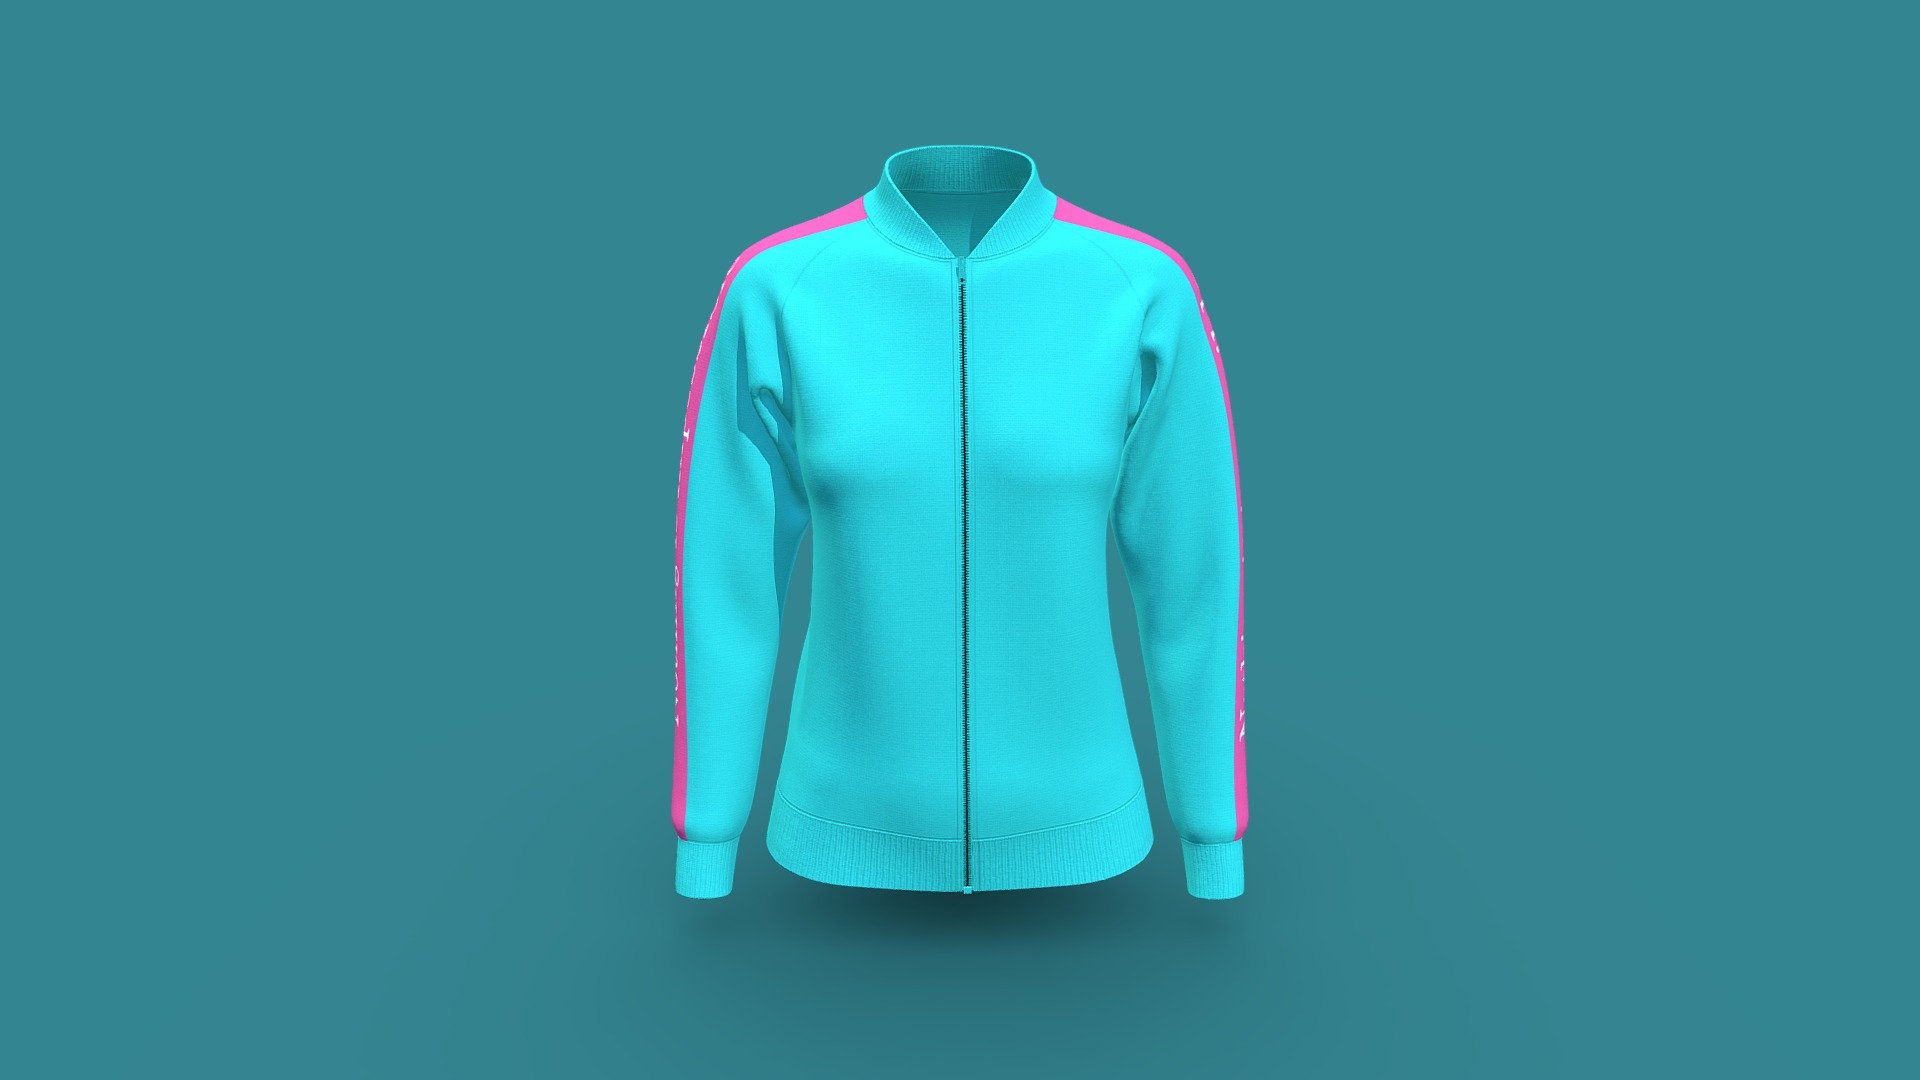 Cloth Title = Raglan Fashion Casual Slim Jacket Sky Blue 

SKU = DG100086 

Category = Women 

Product Type = Jacket 

Cloth Length = Regular 

Body Fit = Slim Fit 

Occasion = Outerwear 

Sleeve Style = Raglan Sleeve 


Our Services:

3D Apparel Design.

OBJ,FBX,GLTF Making with High/Low Poly.

Fabric Digitalization.

Mockup making.

3D Teck Pack.

Pattern Making.

2D Illustration.

Cloth Animation and 360 Spin Video.


Contact us:- 

Email: info@digitalfashionwear.com 

Website: https://digitalfashionwear.com 


We designed all the types of cloth specially focused on product visualization, e-commerce, fitting, and production. 

We will design: 

T-shirts 

Polo shirts 

Hoodies 

Sweatshirt 

Jackets 

Shirts 

TankTops 

Trousers 

Bras 

Underwear 

Blazer 

Aprons 

Leggings 

and All Fashion items. 





Our goal is to make sure what we provide you, meets your demand 3d model